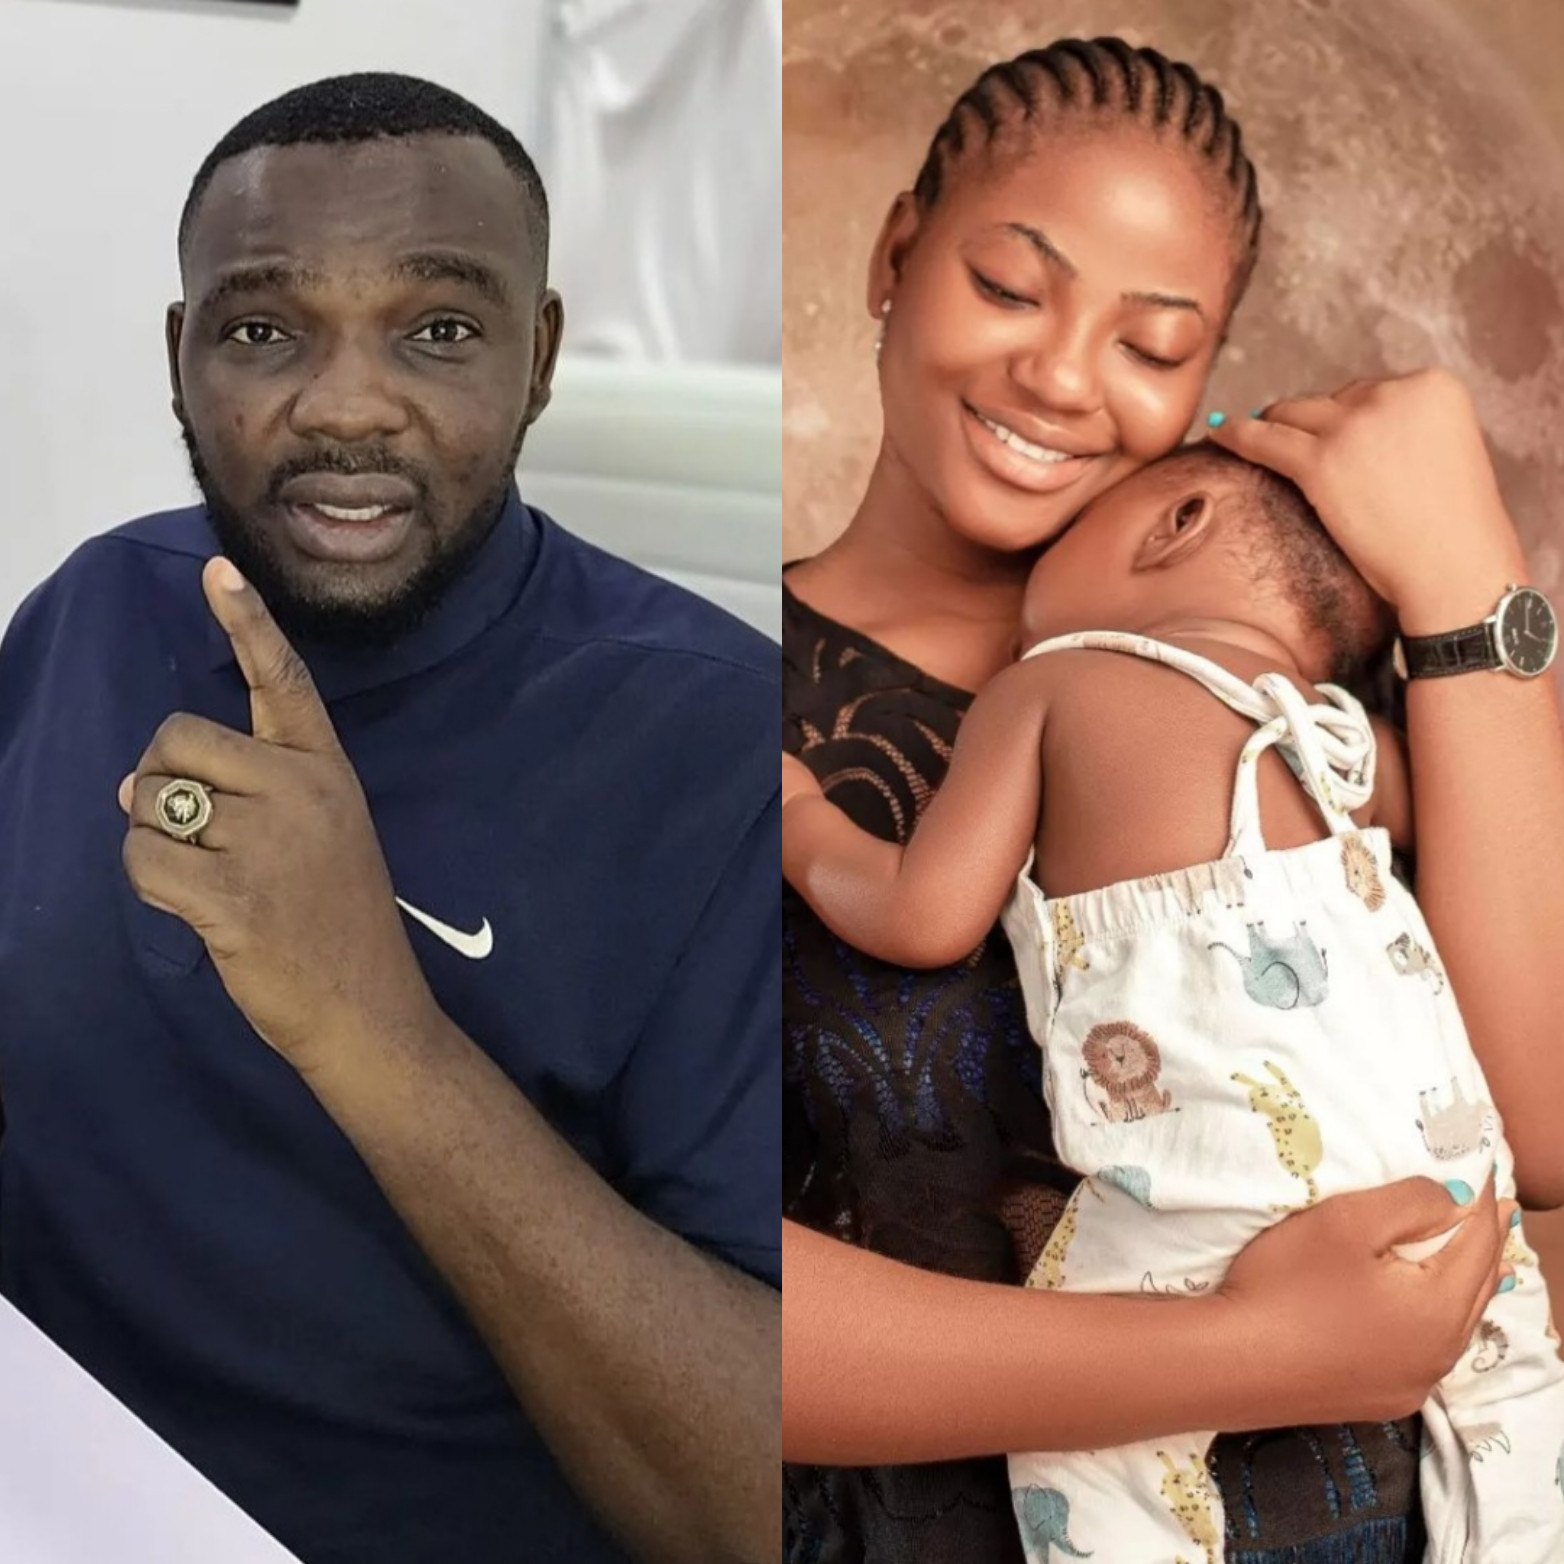 "I’ve been battling depression all alone with my child" Yomi Fabiyi's ex accuses him of not providing for her and their infant son